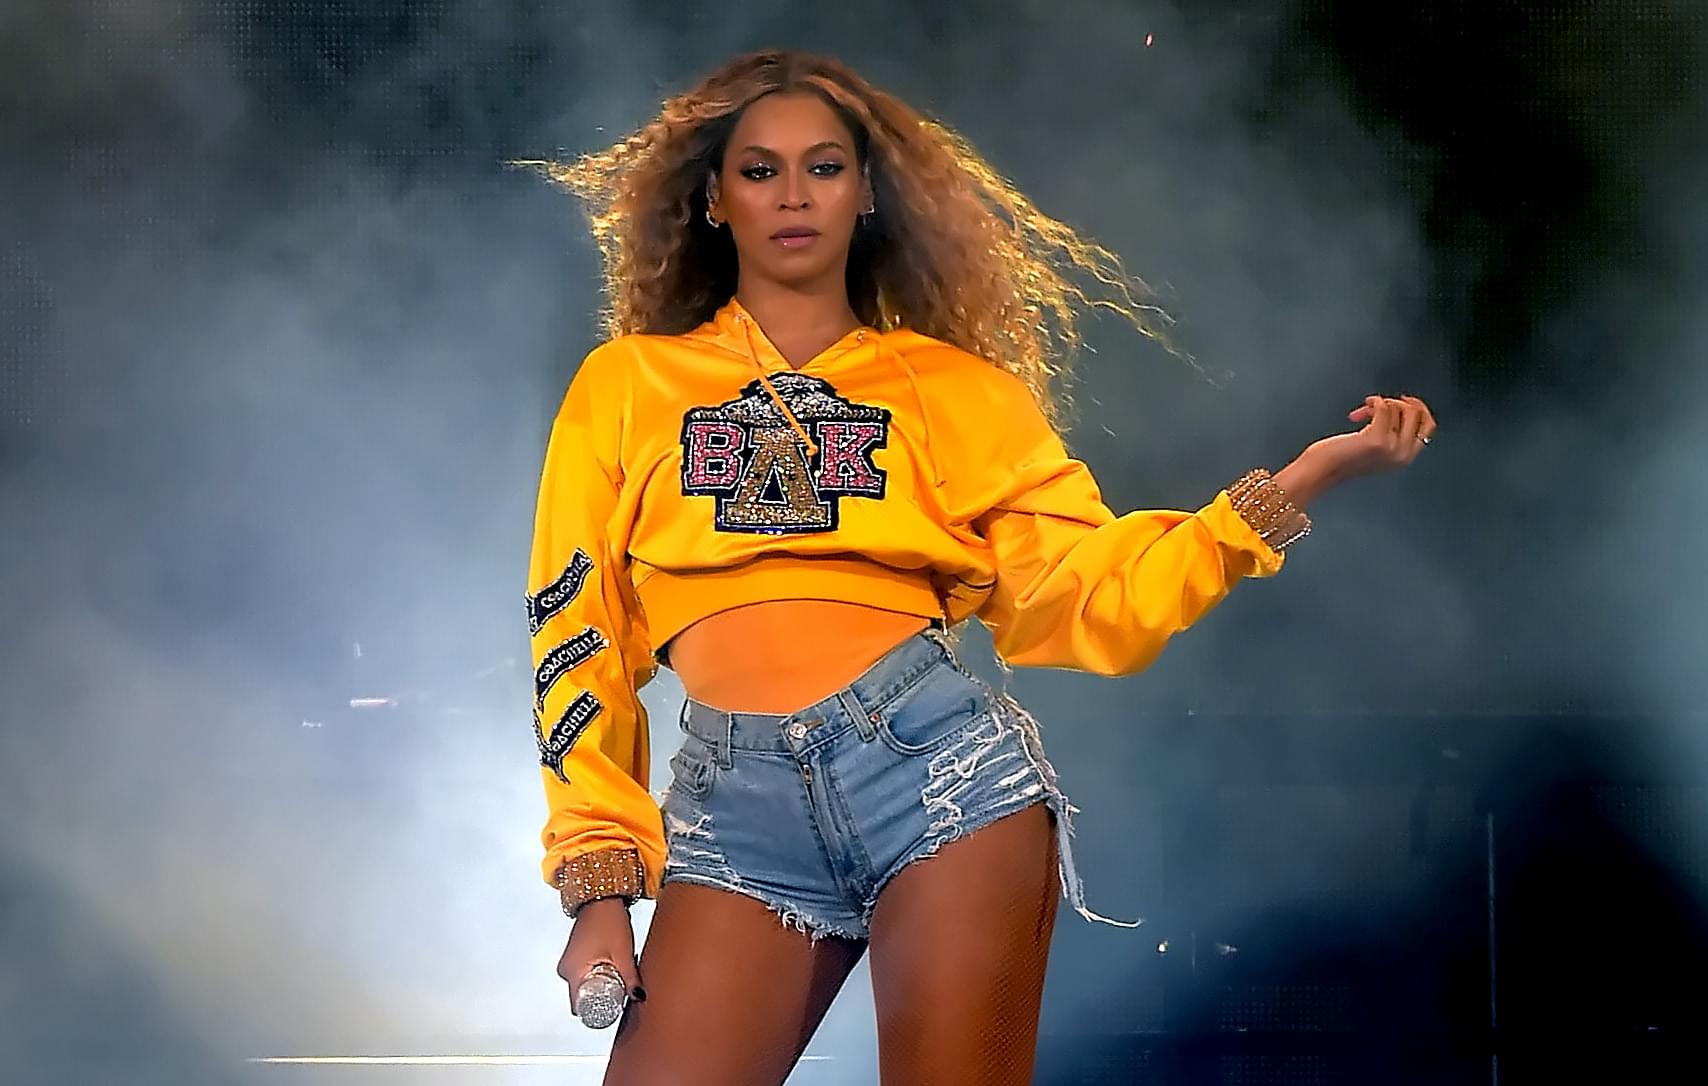 Beyoncé Partners With Adidas To Relaunch Ivy Park